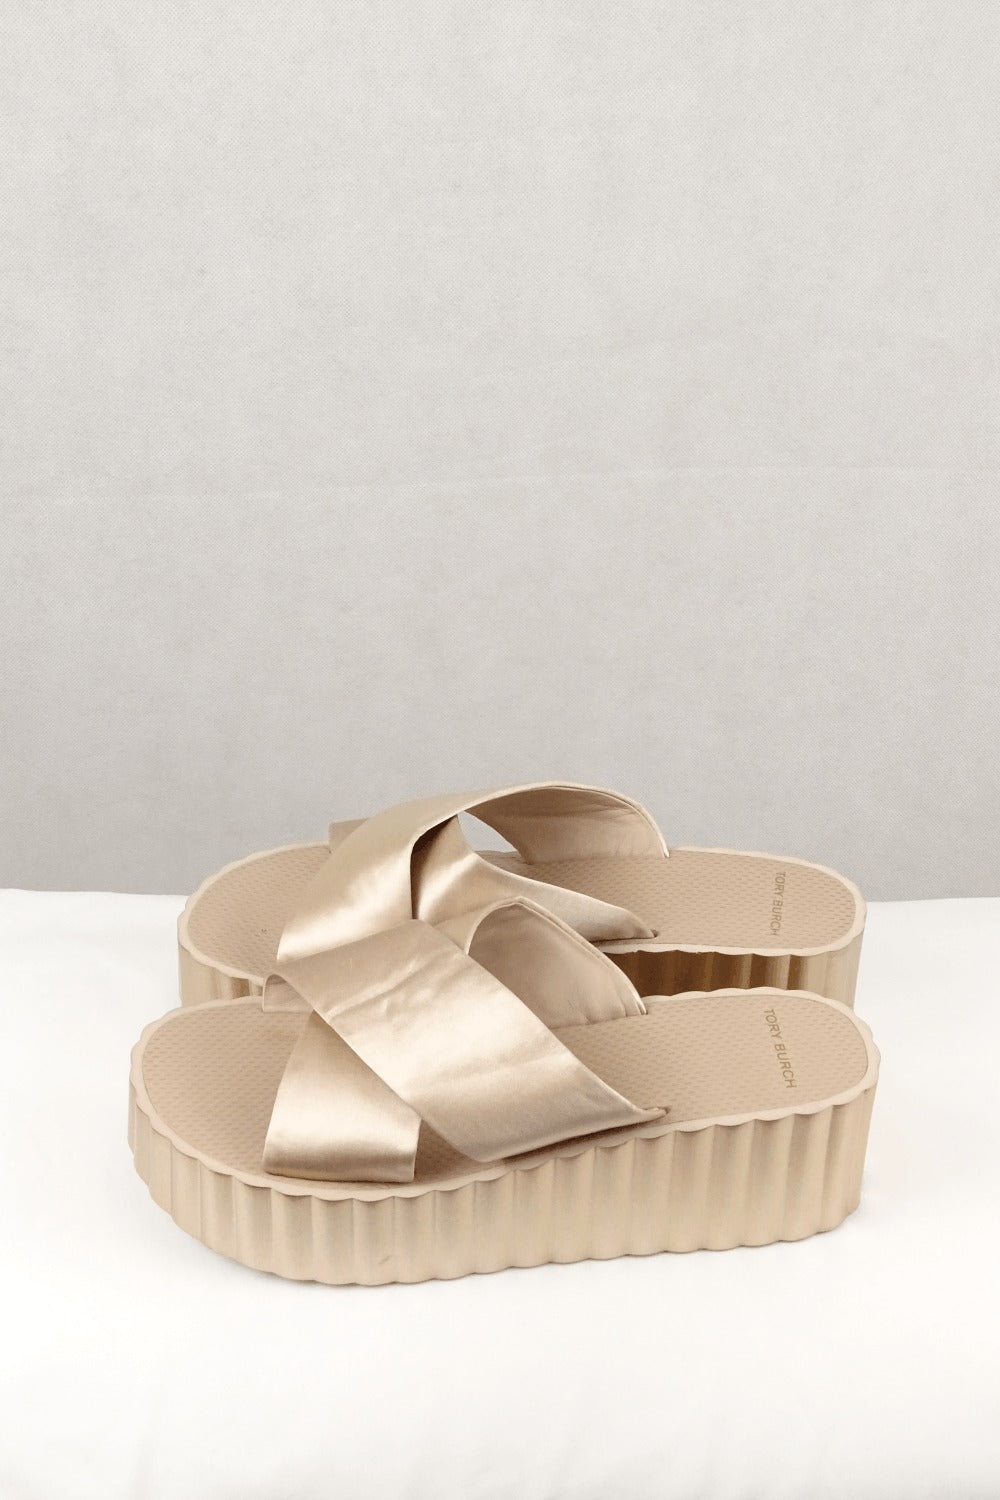 Tory Burch Gold Wedged Sandals 11